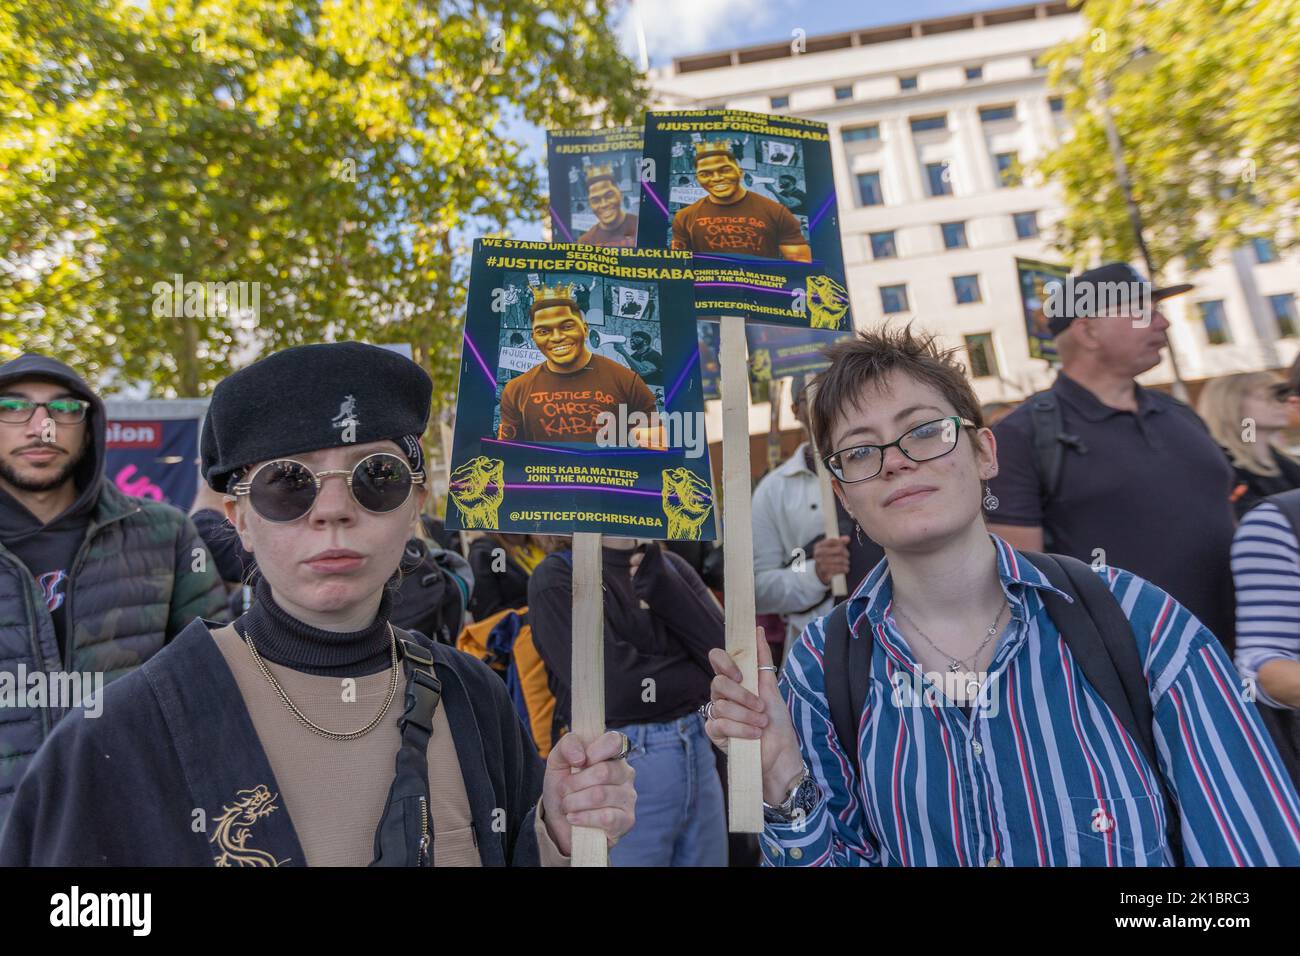 London, UK. 17th Sept, 2022. Protest outside New Scotland Yard for Chris Kaba, a 24-year-old black man who was fatally shot by police in Streatham Hill, south London, on 5 September. Penelope Barritt/Alamy Live News Stock Photo